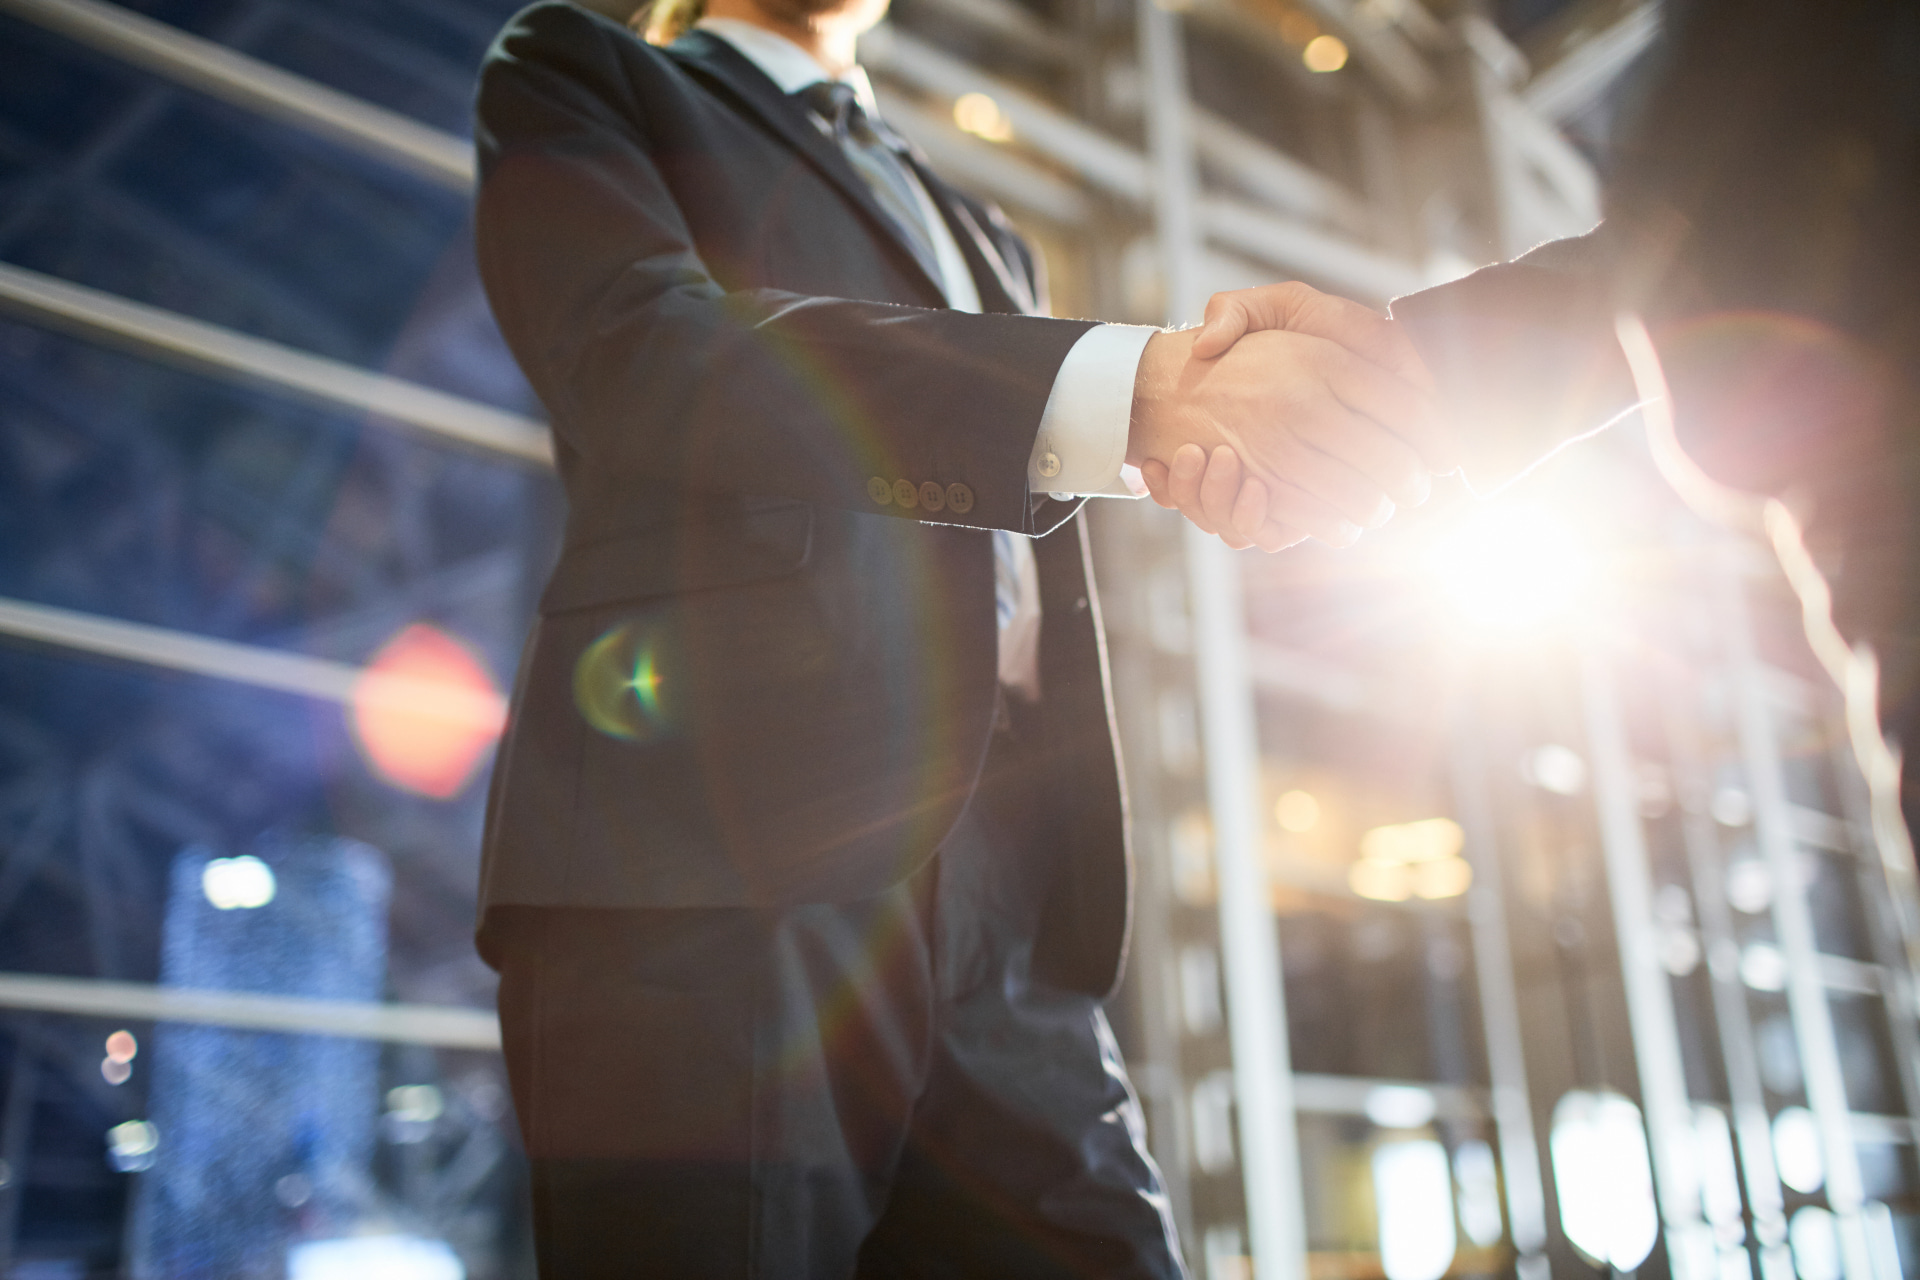 A business broker shakes hands with a client to finish a deal.